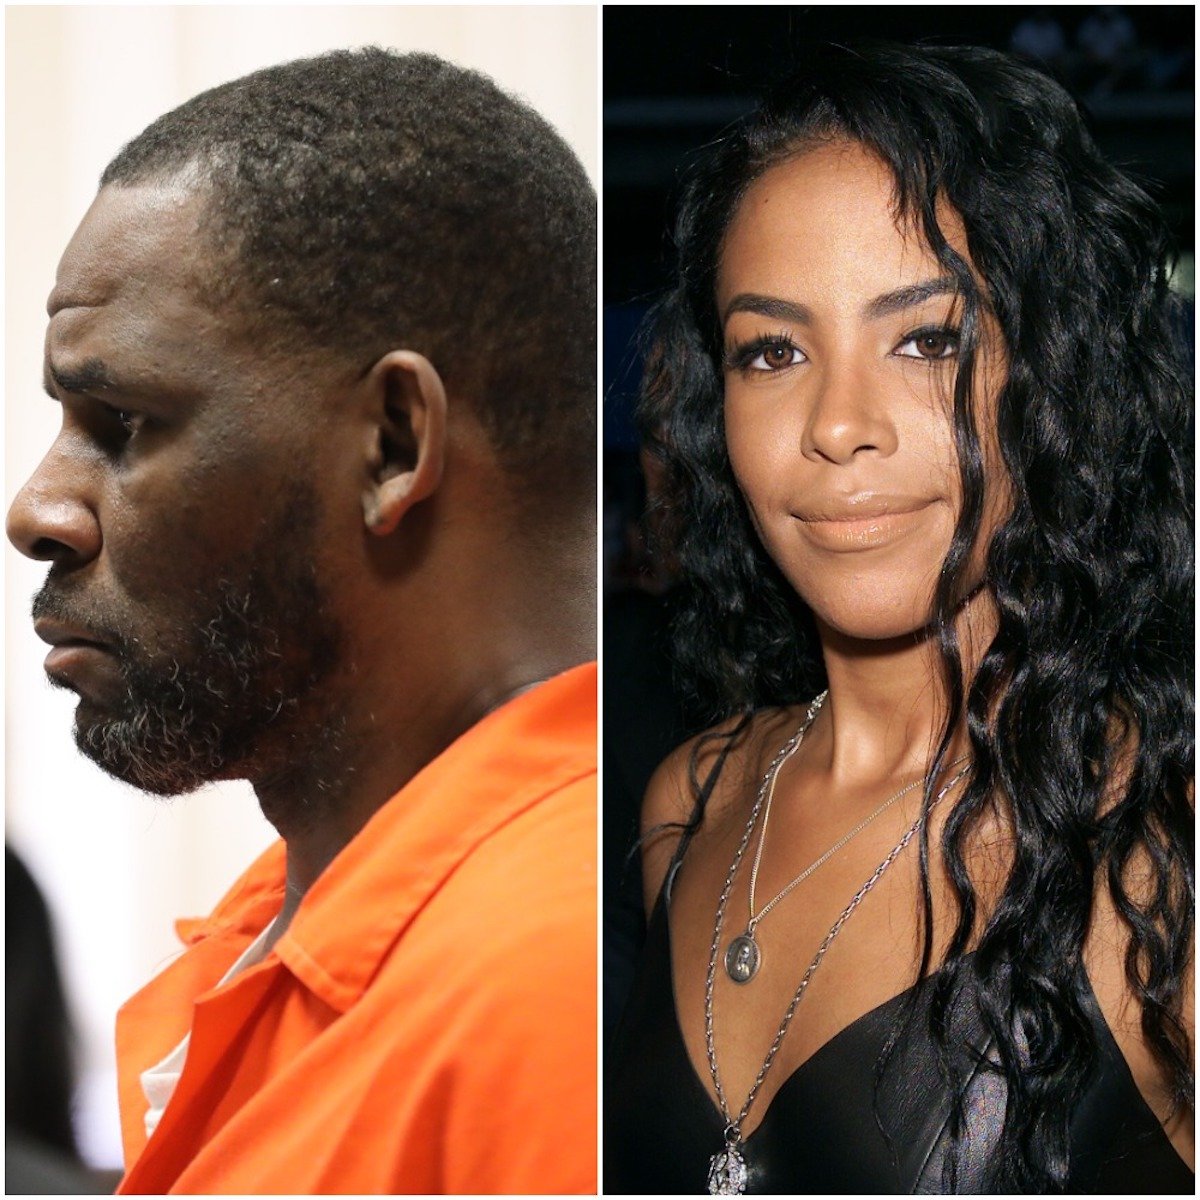 R. Kelly's Legal Team Admits to His Relationship With Aaliyah as Part